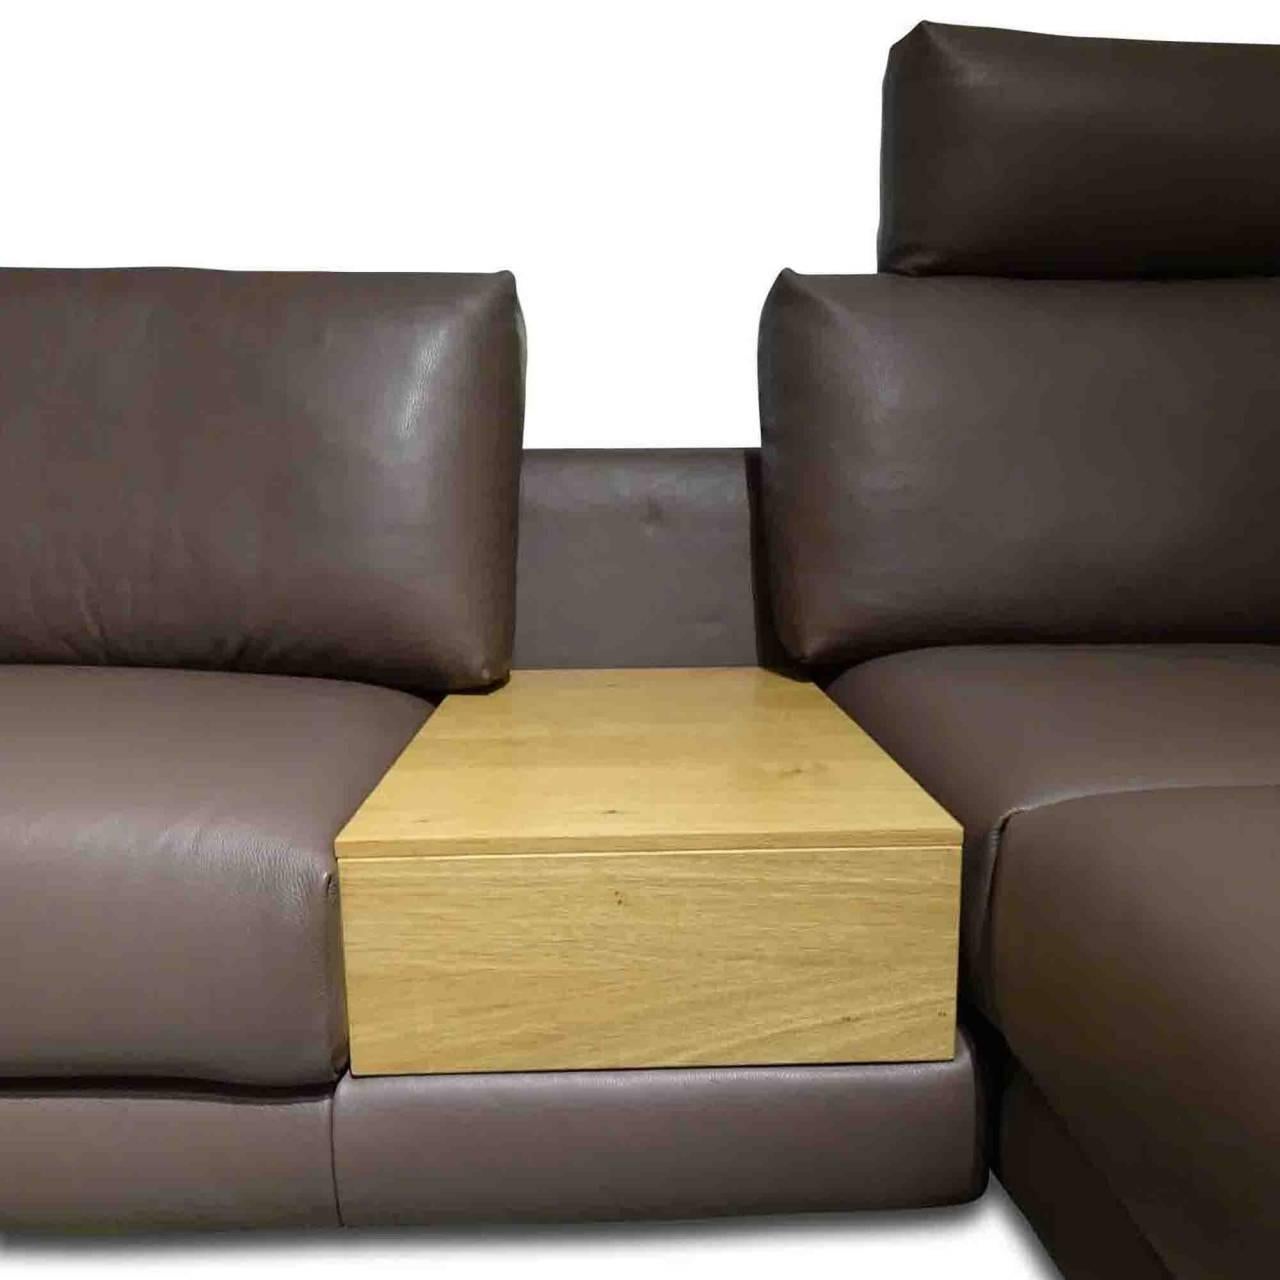 We are delighted to present to you the aesthetic L-formed sofa 